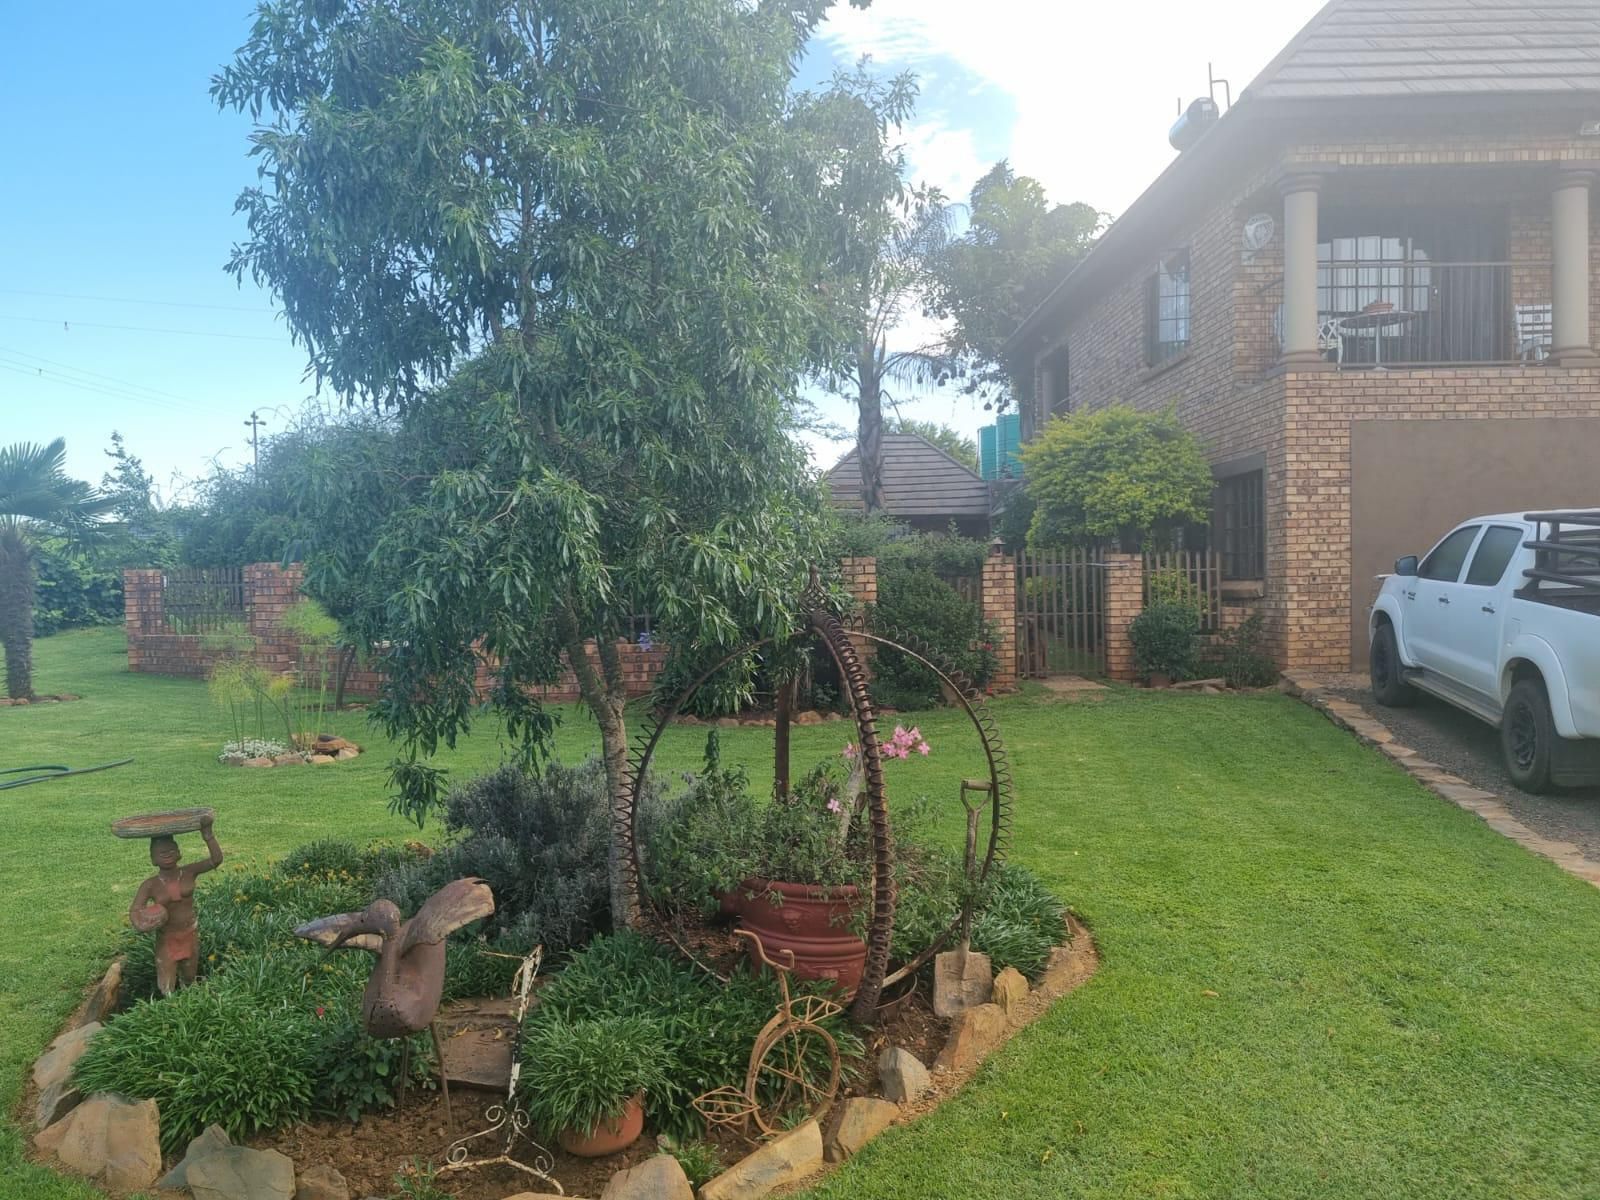 Big Boma Guest Lodge Lydenburg Mpumalanga South Africa House, Building, Architecture, Plant, Nature, Tree, Wood, Garden, Car, Vehicle